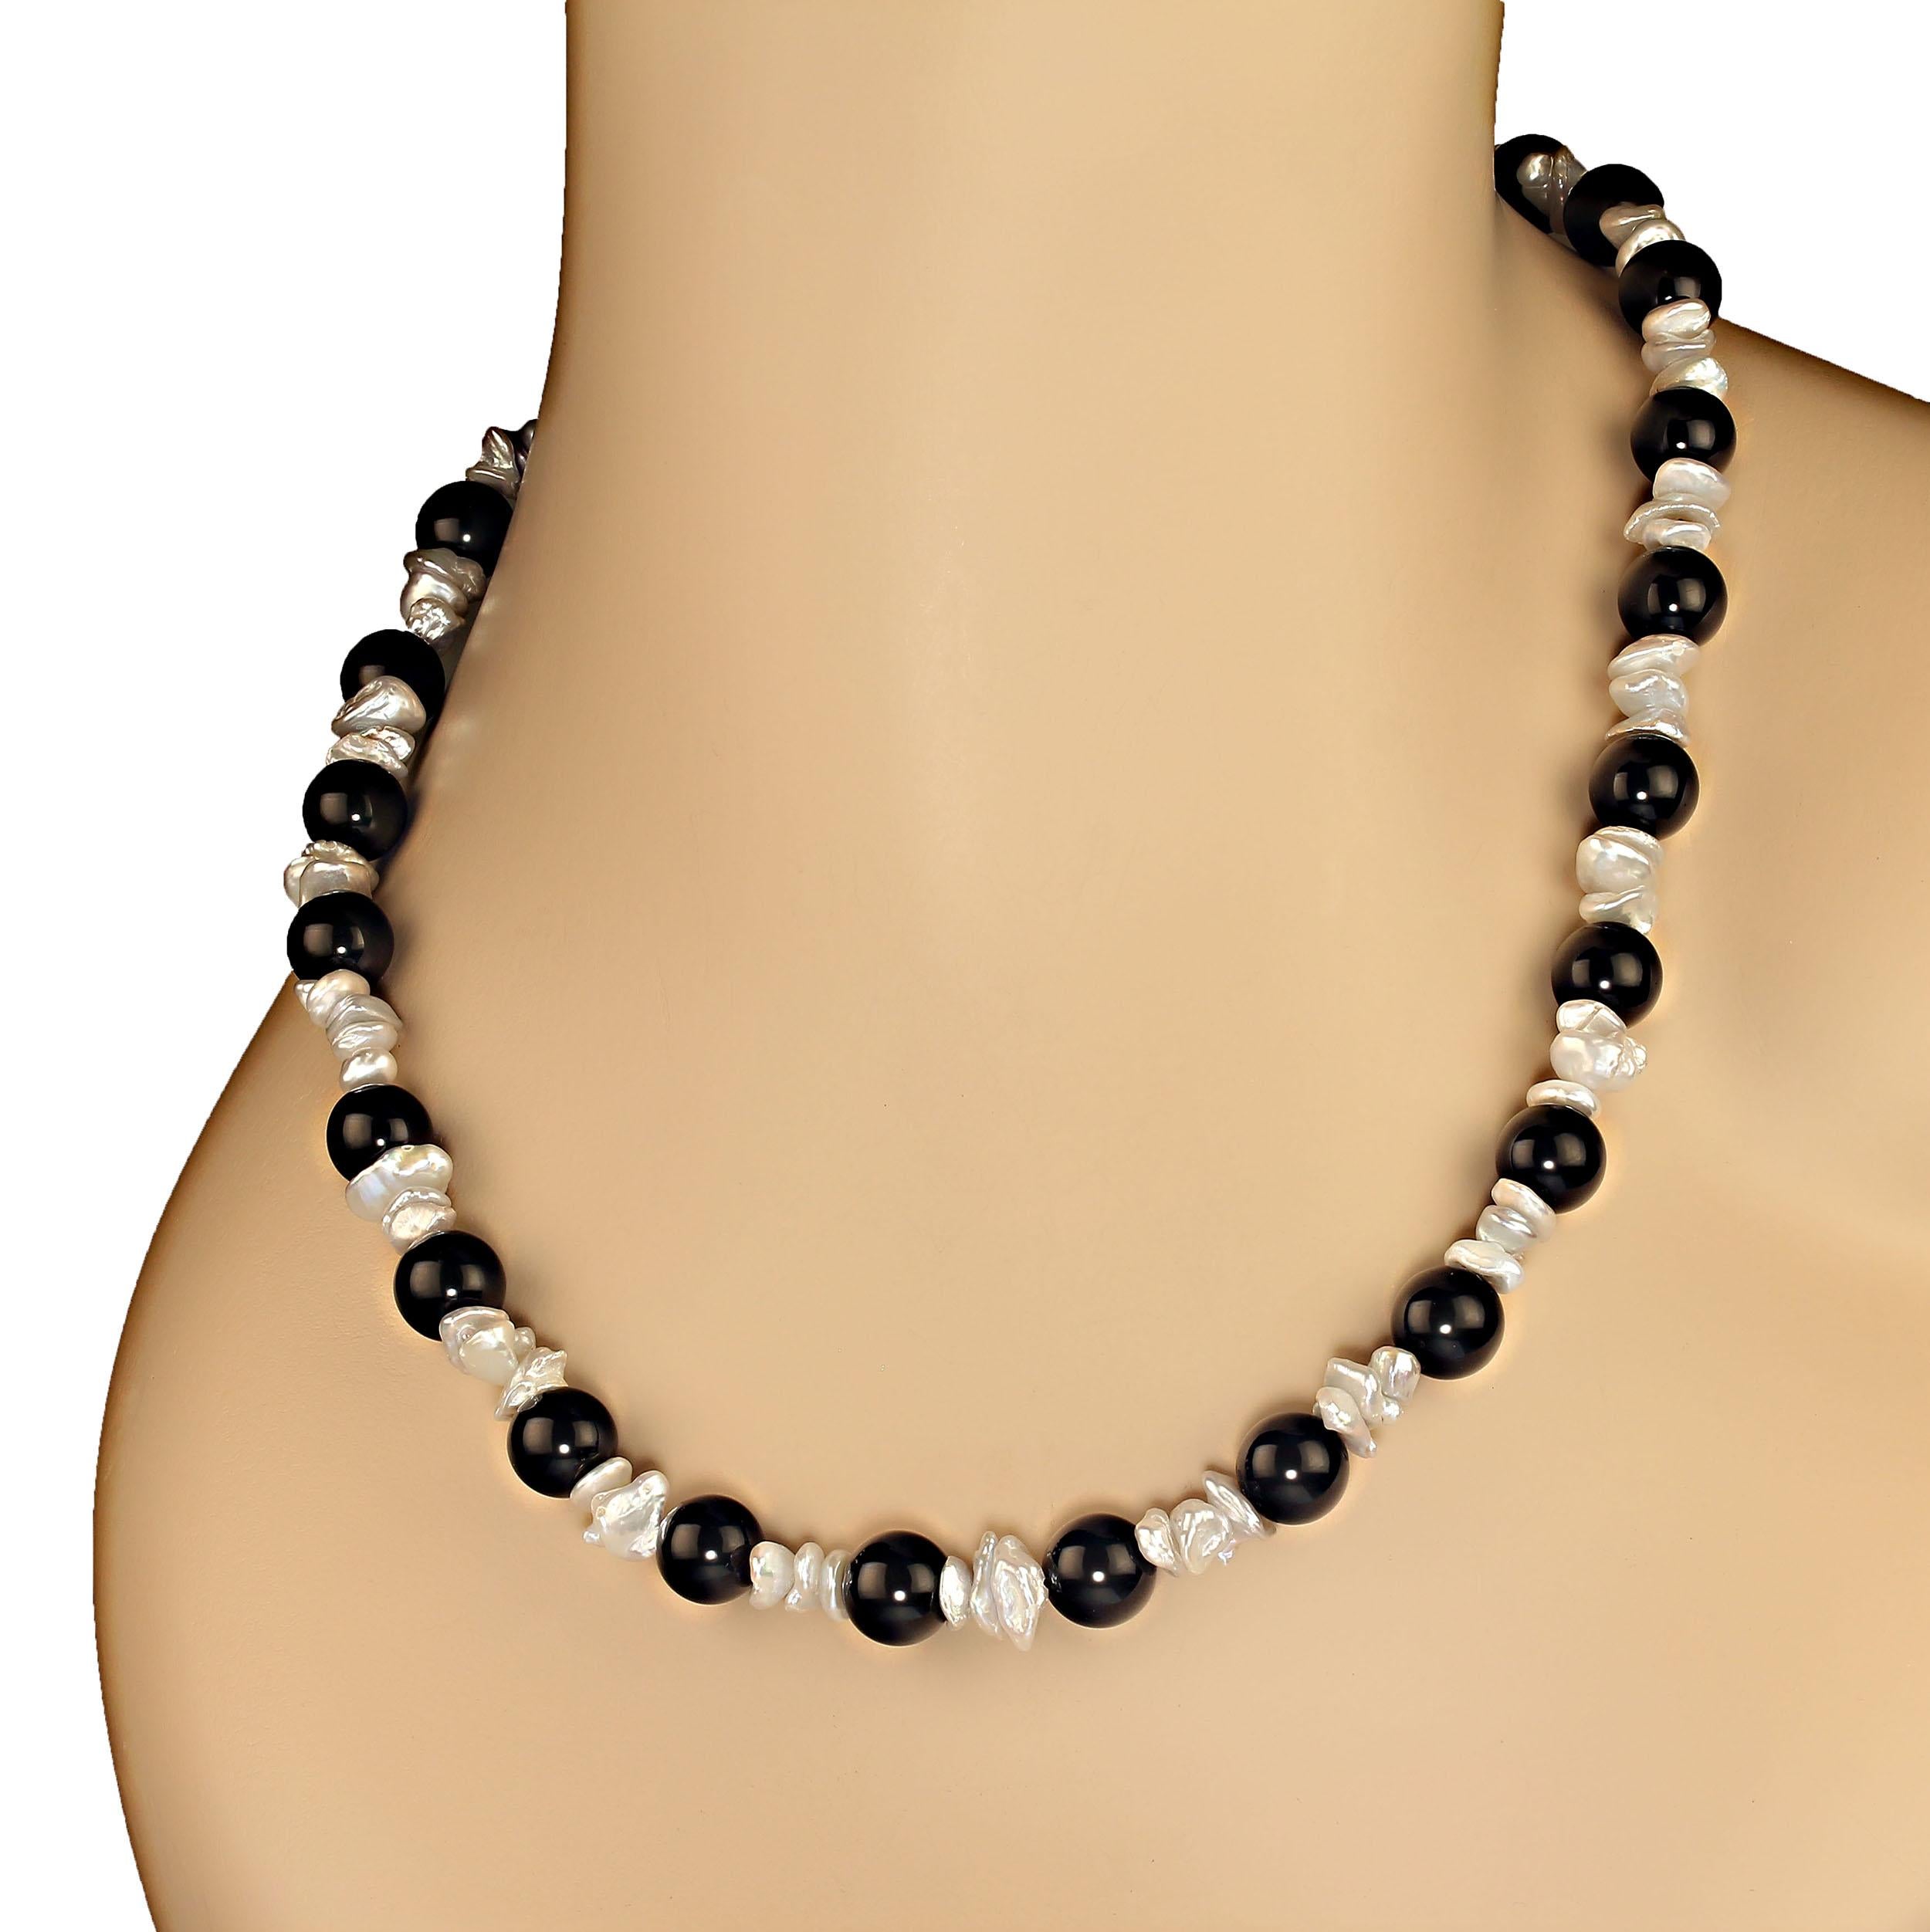 20 Inch gray iridescent biwa pearls mixed with highly polished 10mm black onyx create this elegant and so very wearable necklace. The 6mm biwa pearls are each unique and iridescent so they don't sit just side by side.  This is a great necklace for